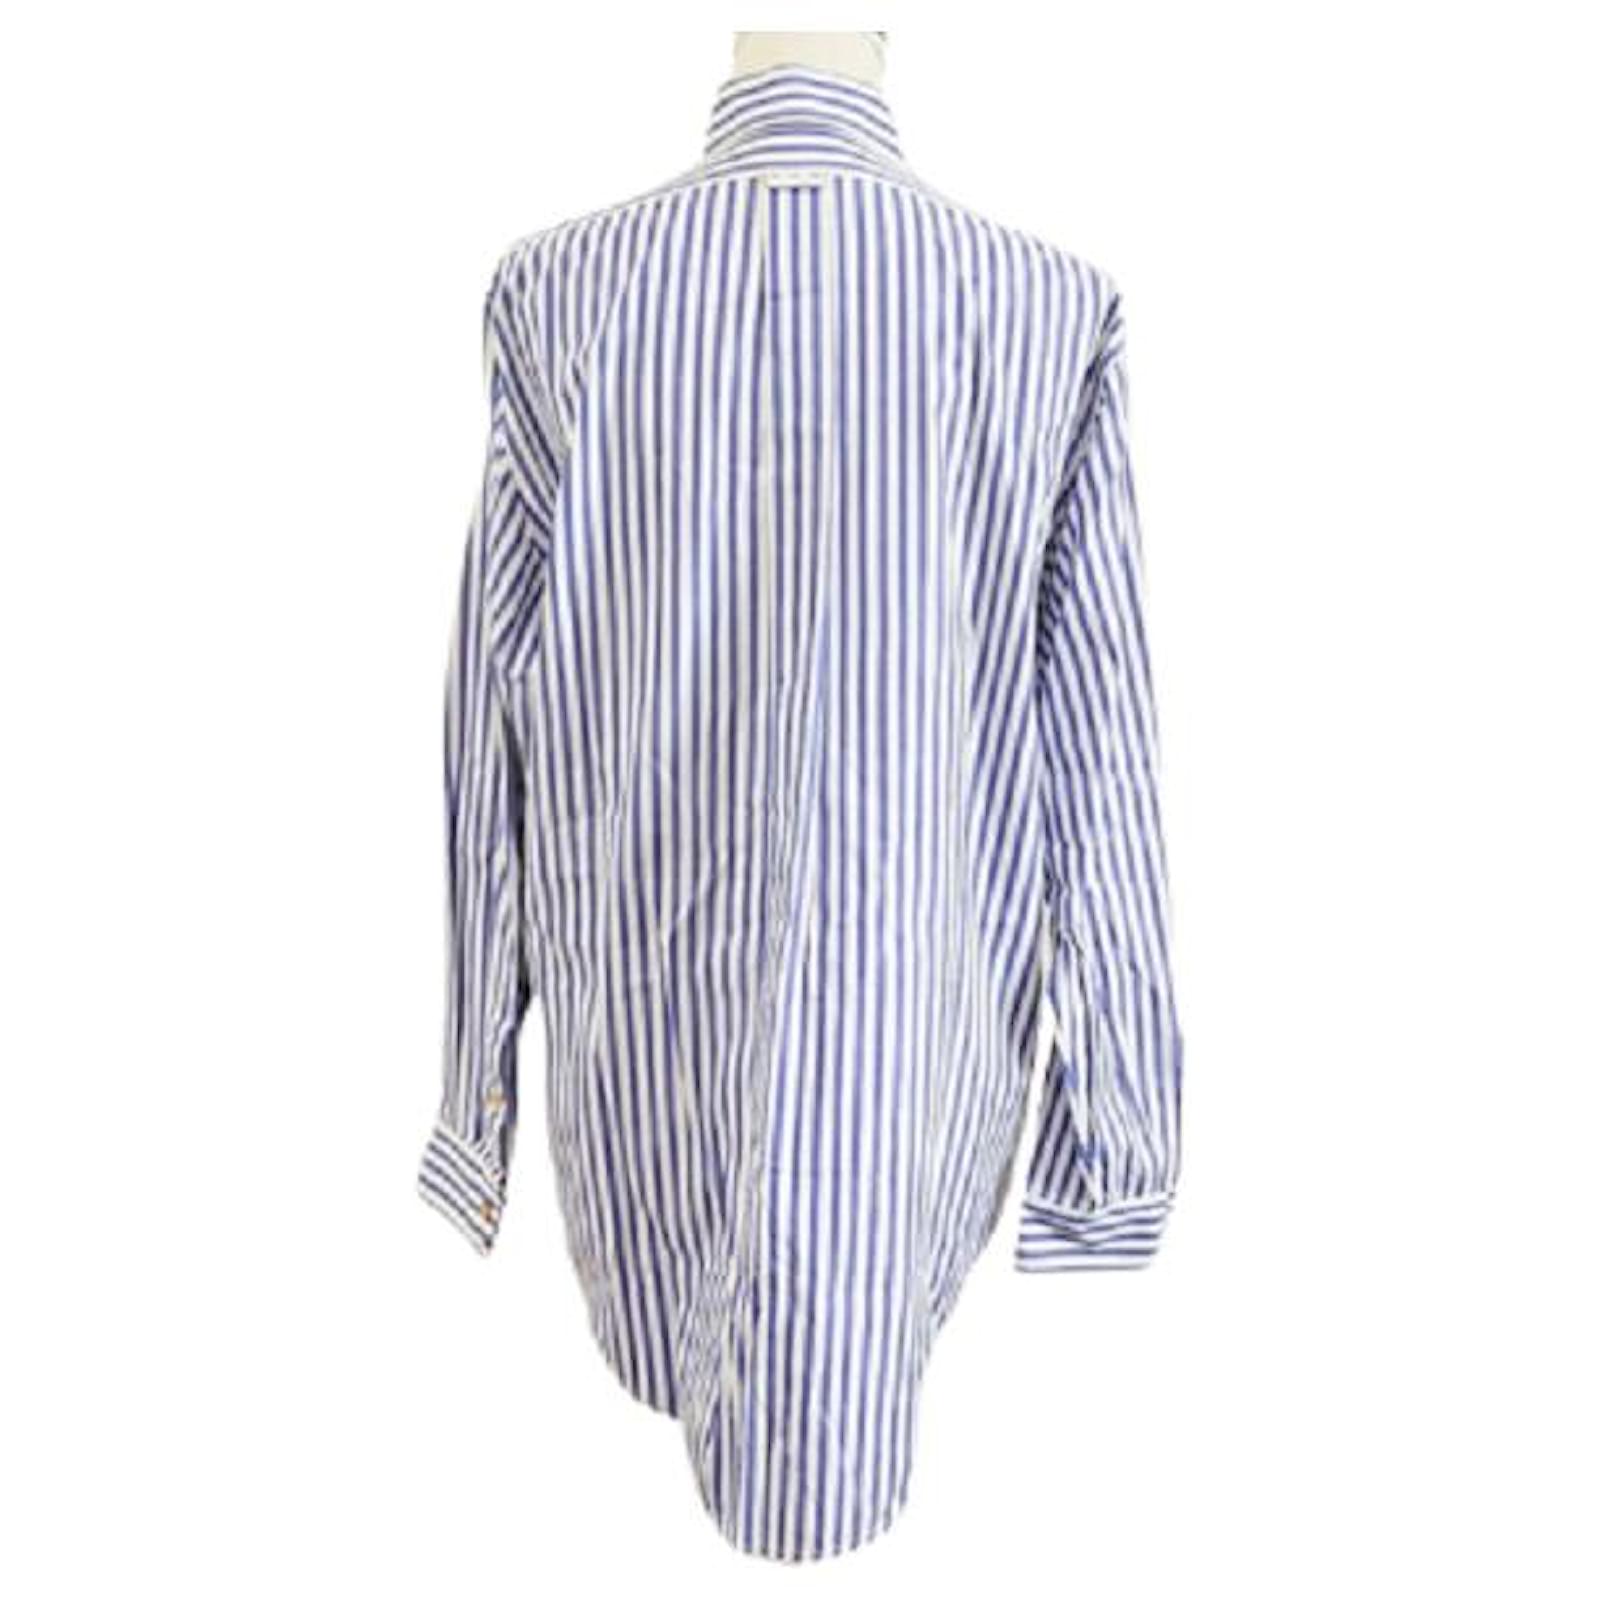 *[Used] Chanel Striped Shirt Pocket Coco Mark White x Blue Gold